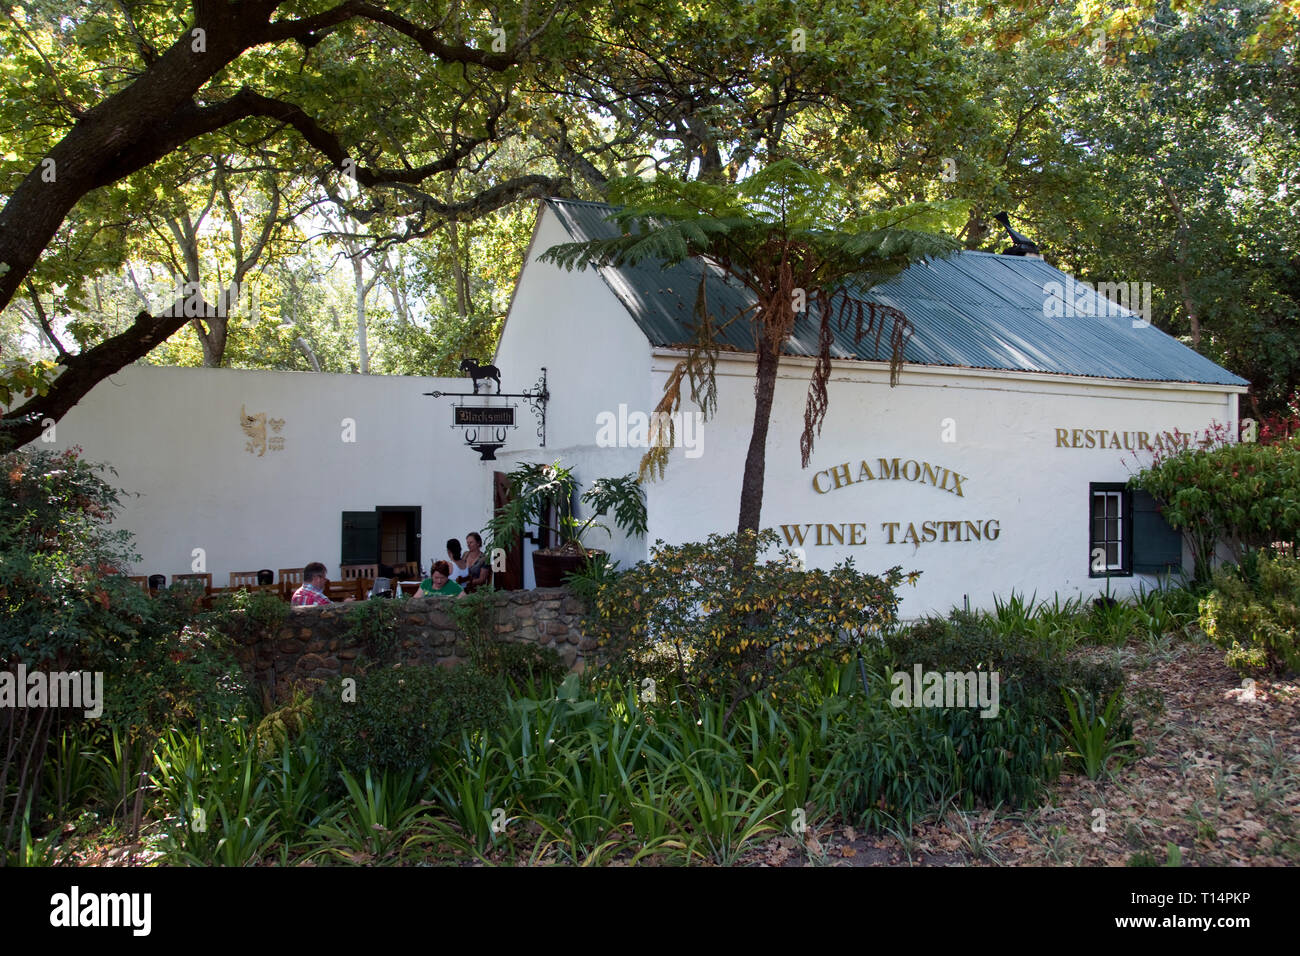 The Chamonix wine tasting room in Franschhoek, a wine town in the Western Cape Province, and one of the oldest towns of South Africa. Stock Photo